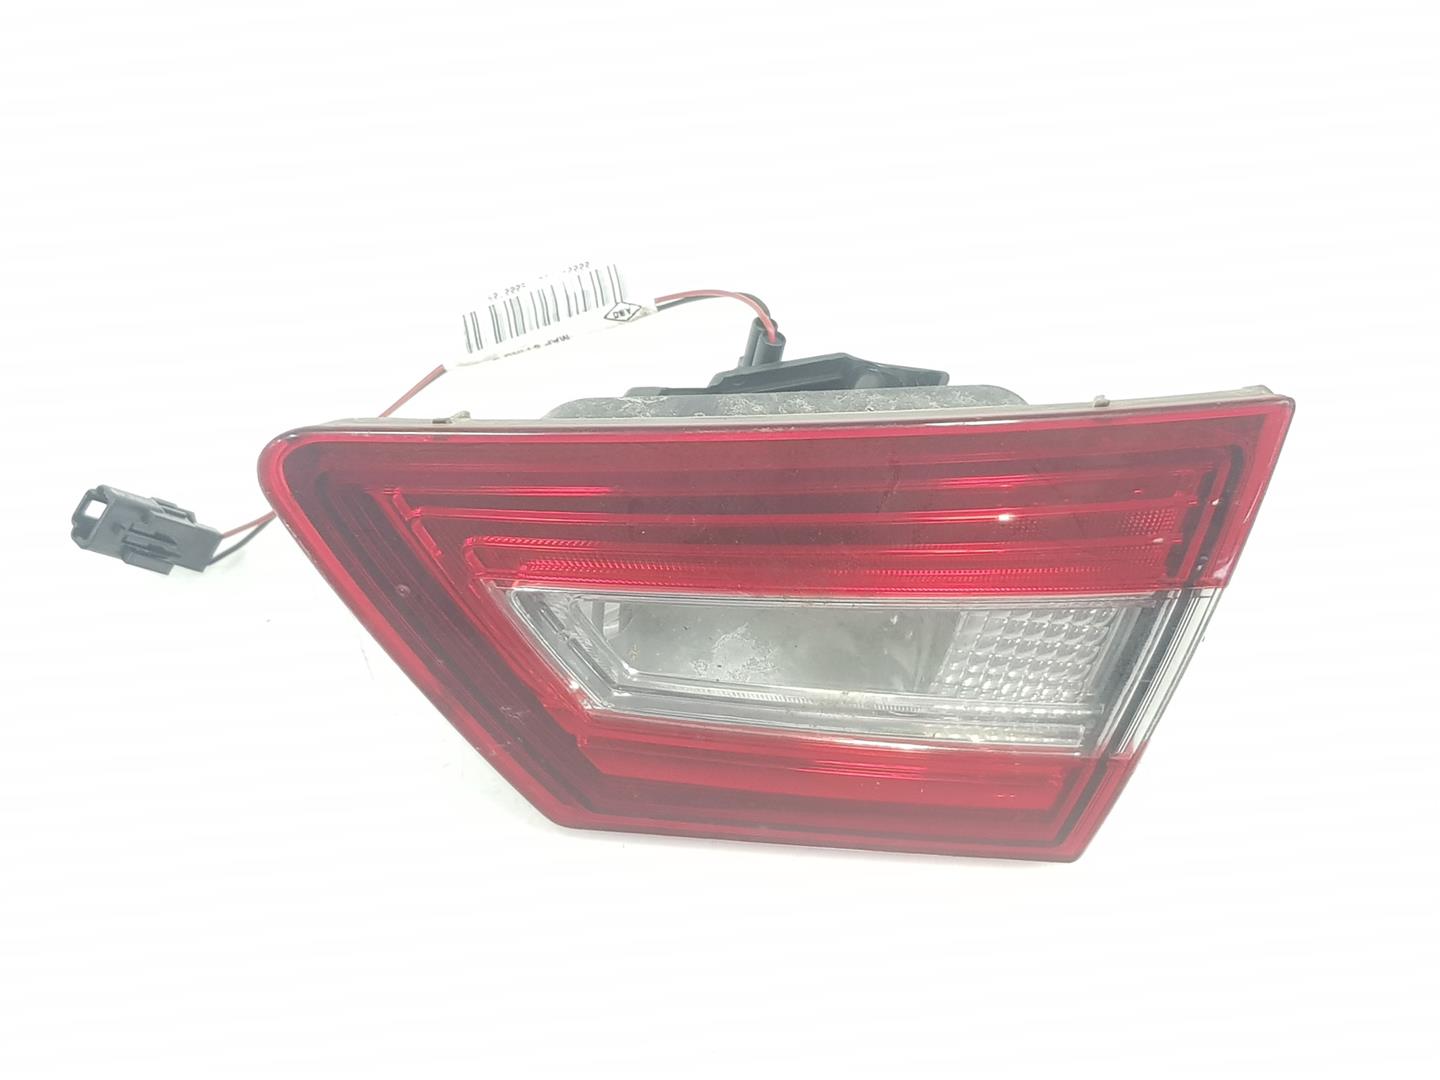 RENAULT Clio 3 generation (2005-2012) Left Side Tailgate Taillight 265505796R, 265505796R 19764155